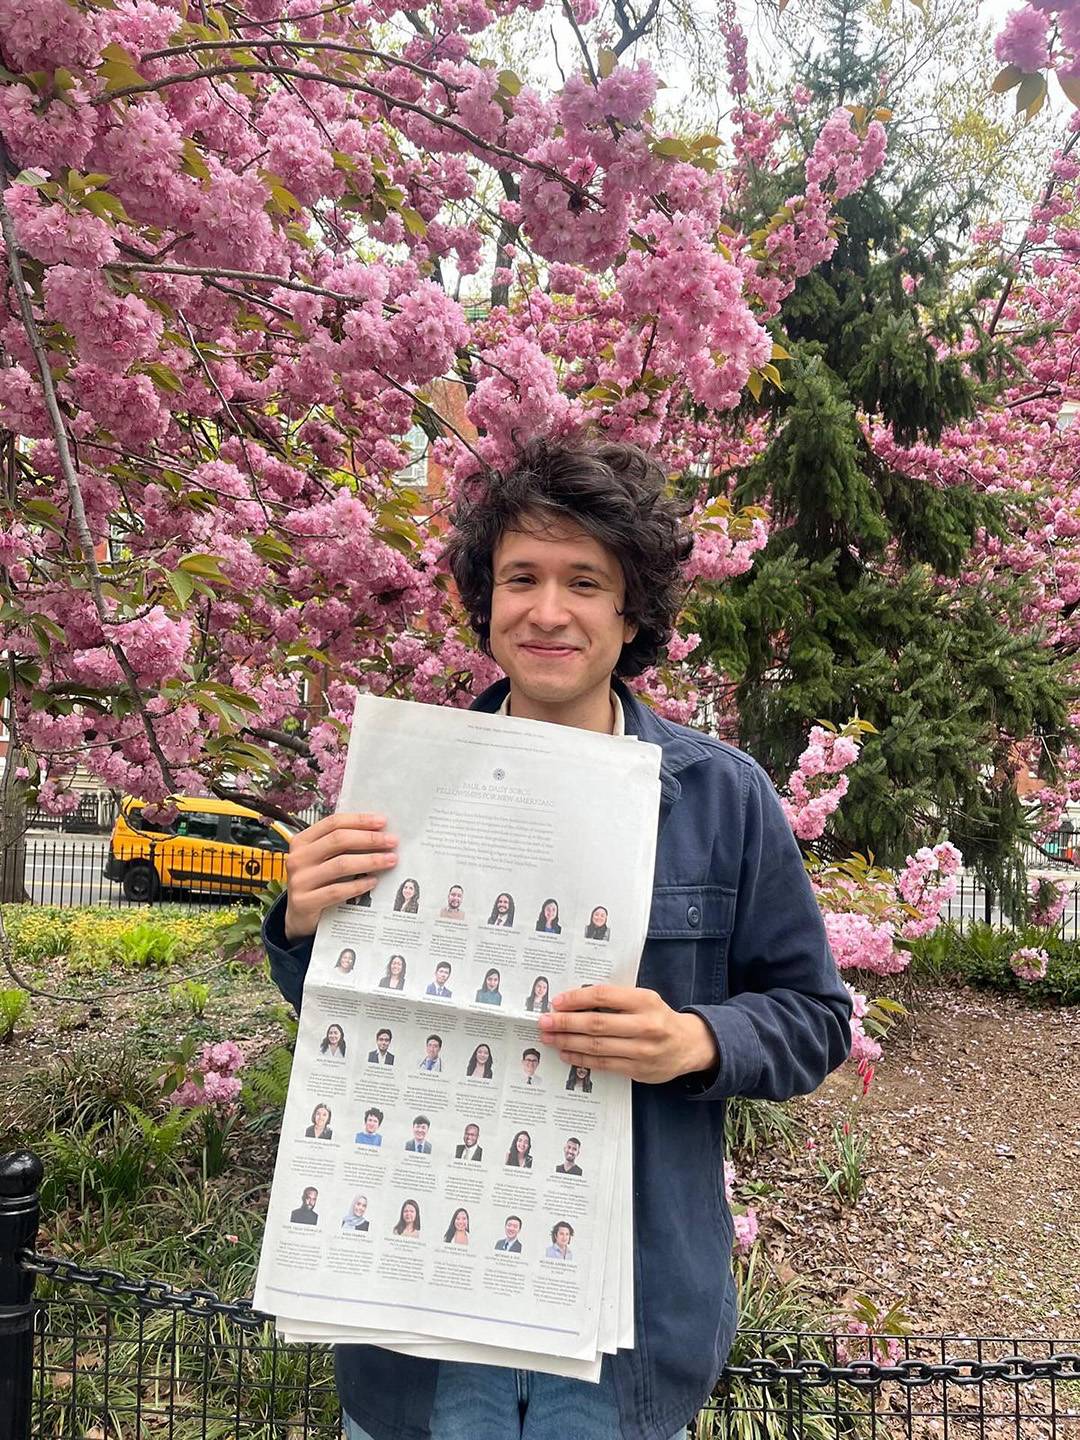 Pablo Mejia holds a copy of The New York Times featuring the newly announced Paul & Daisy Soros Fellows.